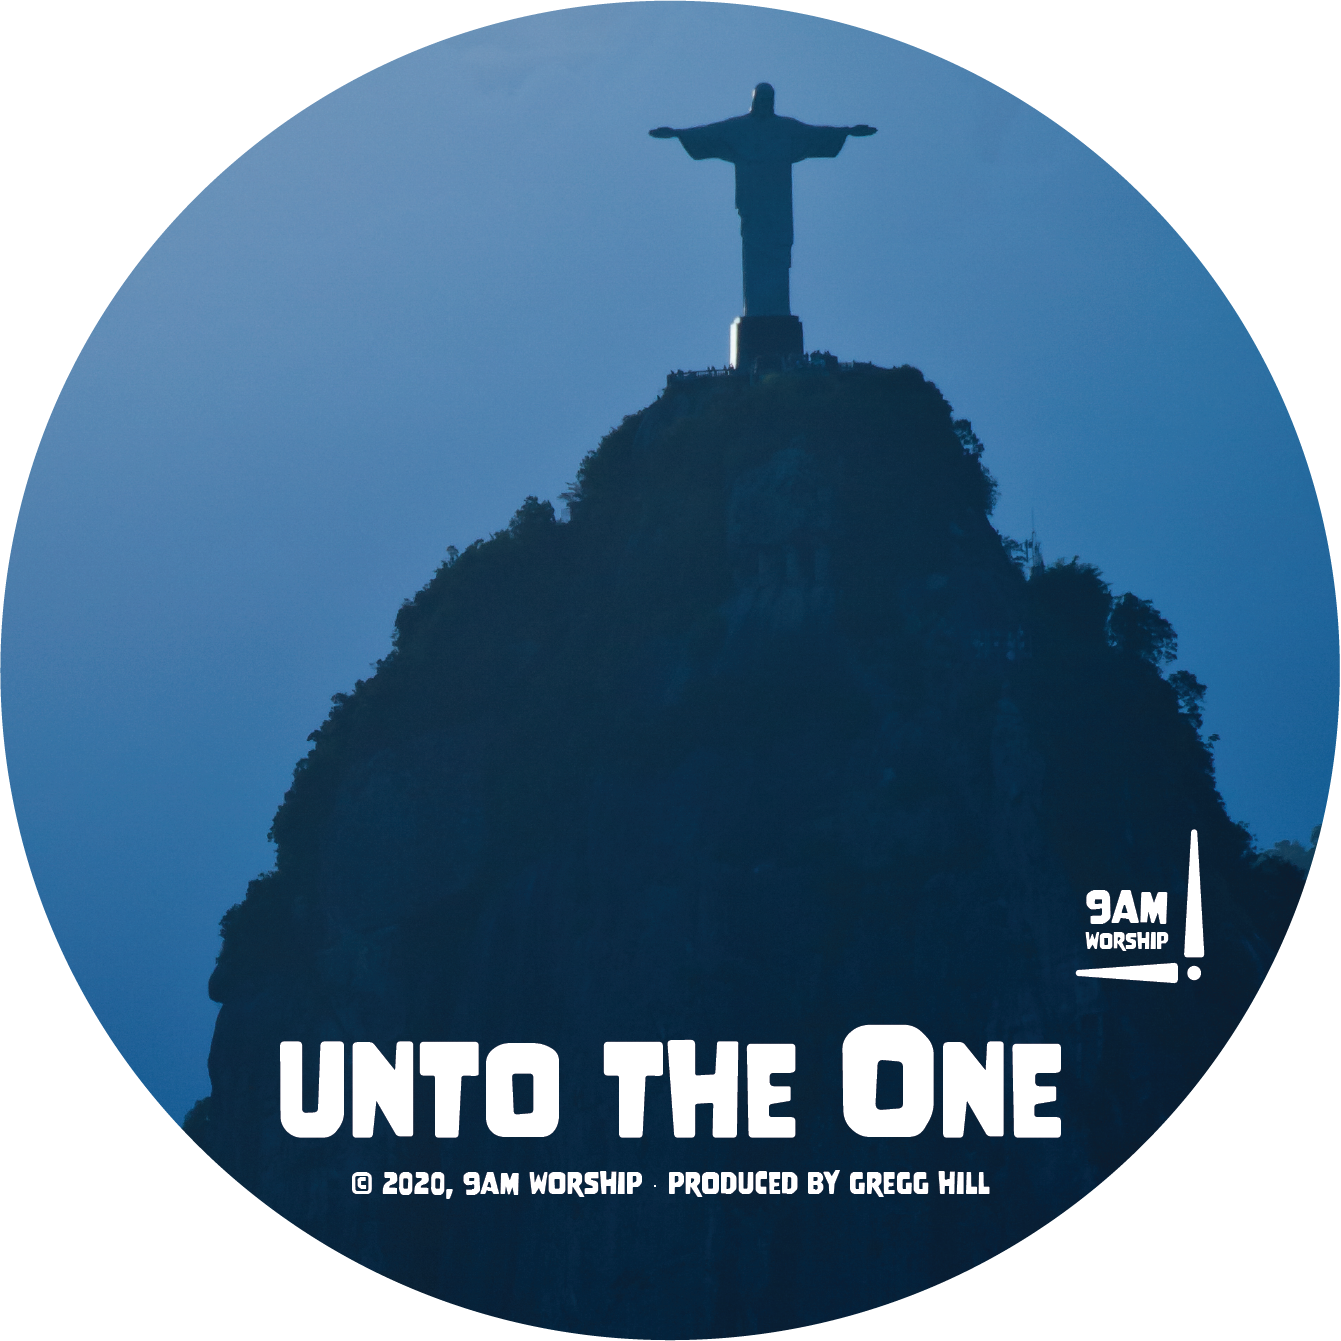 Album disc image for "unto the One" by 9am worship